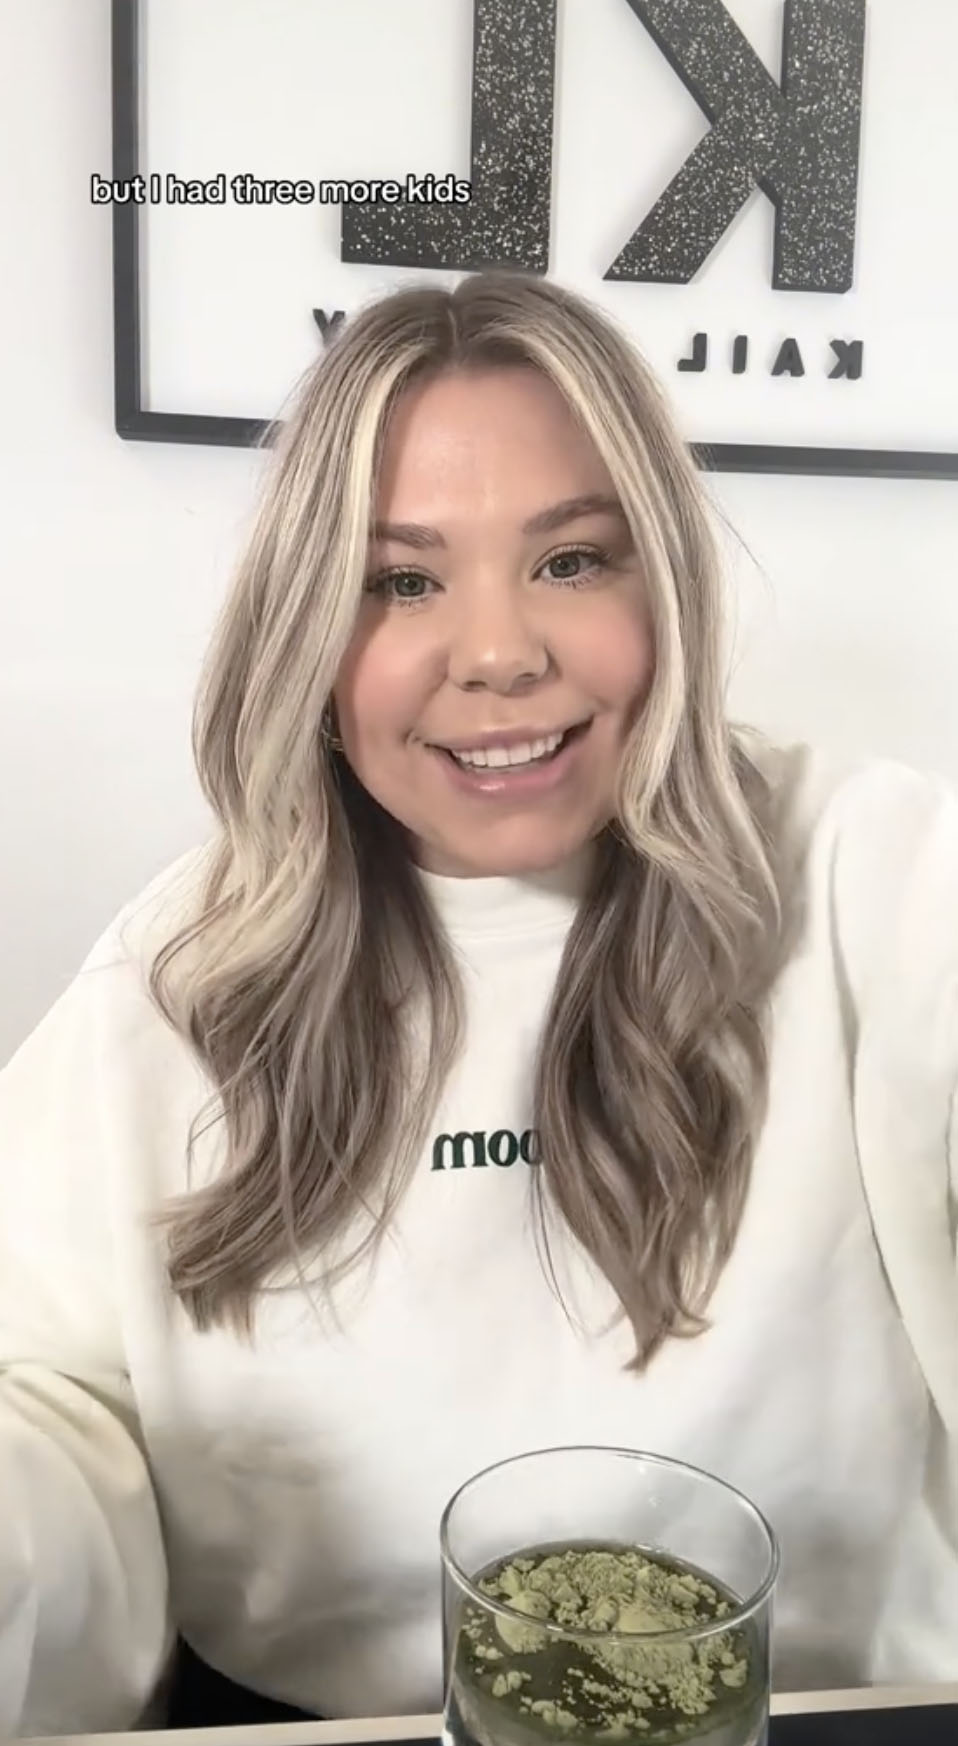 Kailyn explained she now has three more children who need their own rooms